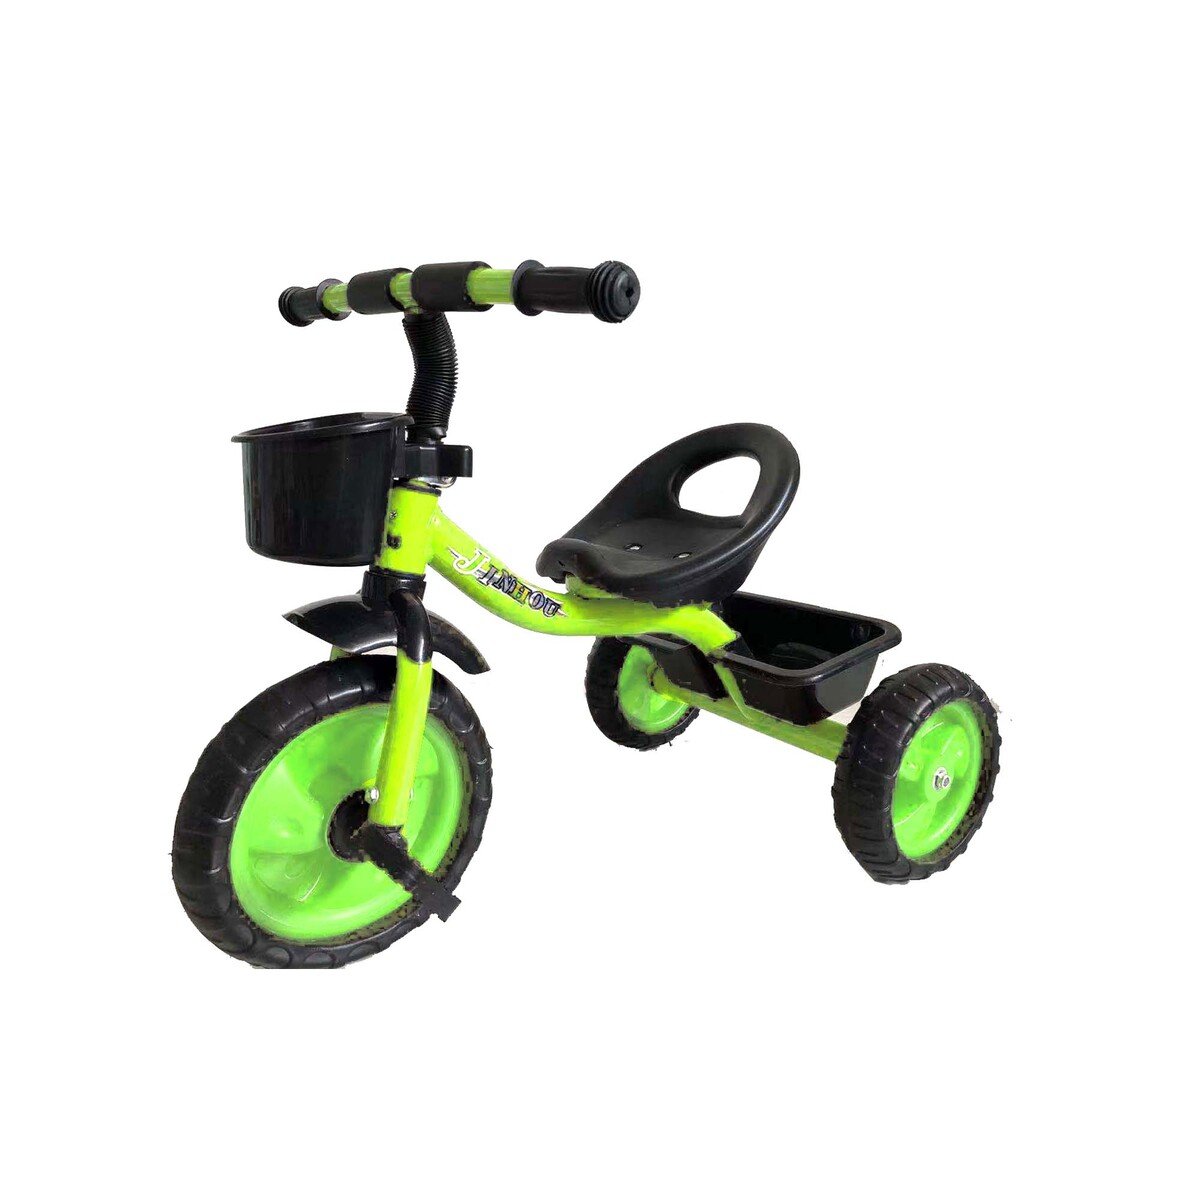 Skid Fusion Kids Tricycle JH-370 Green